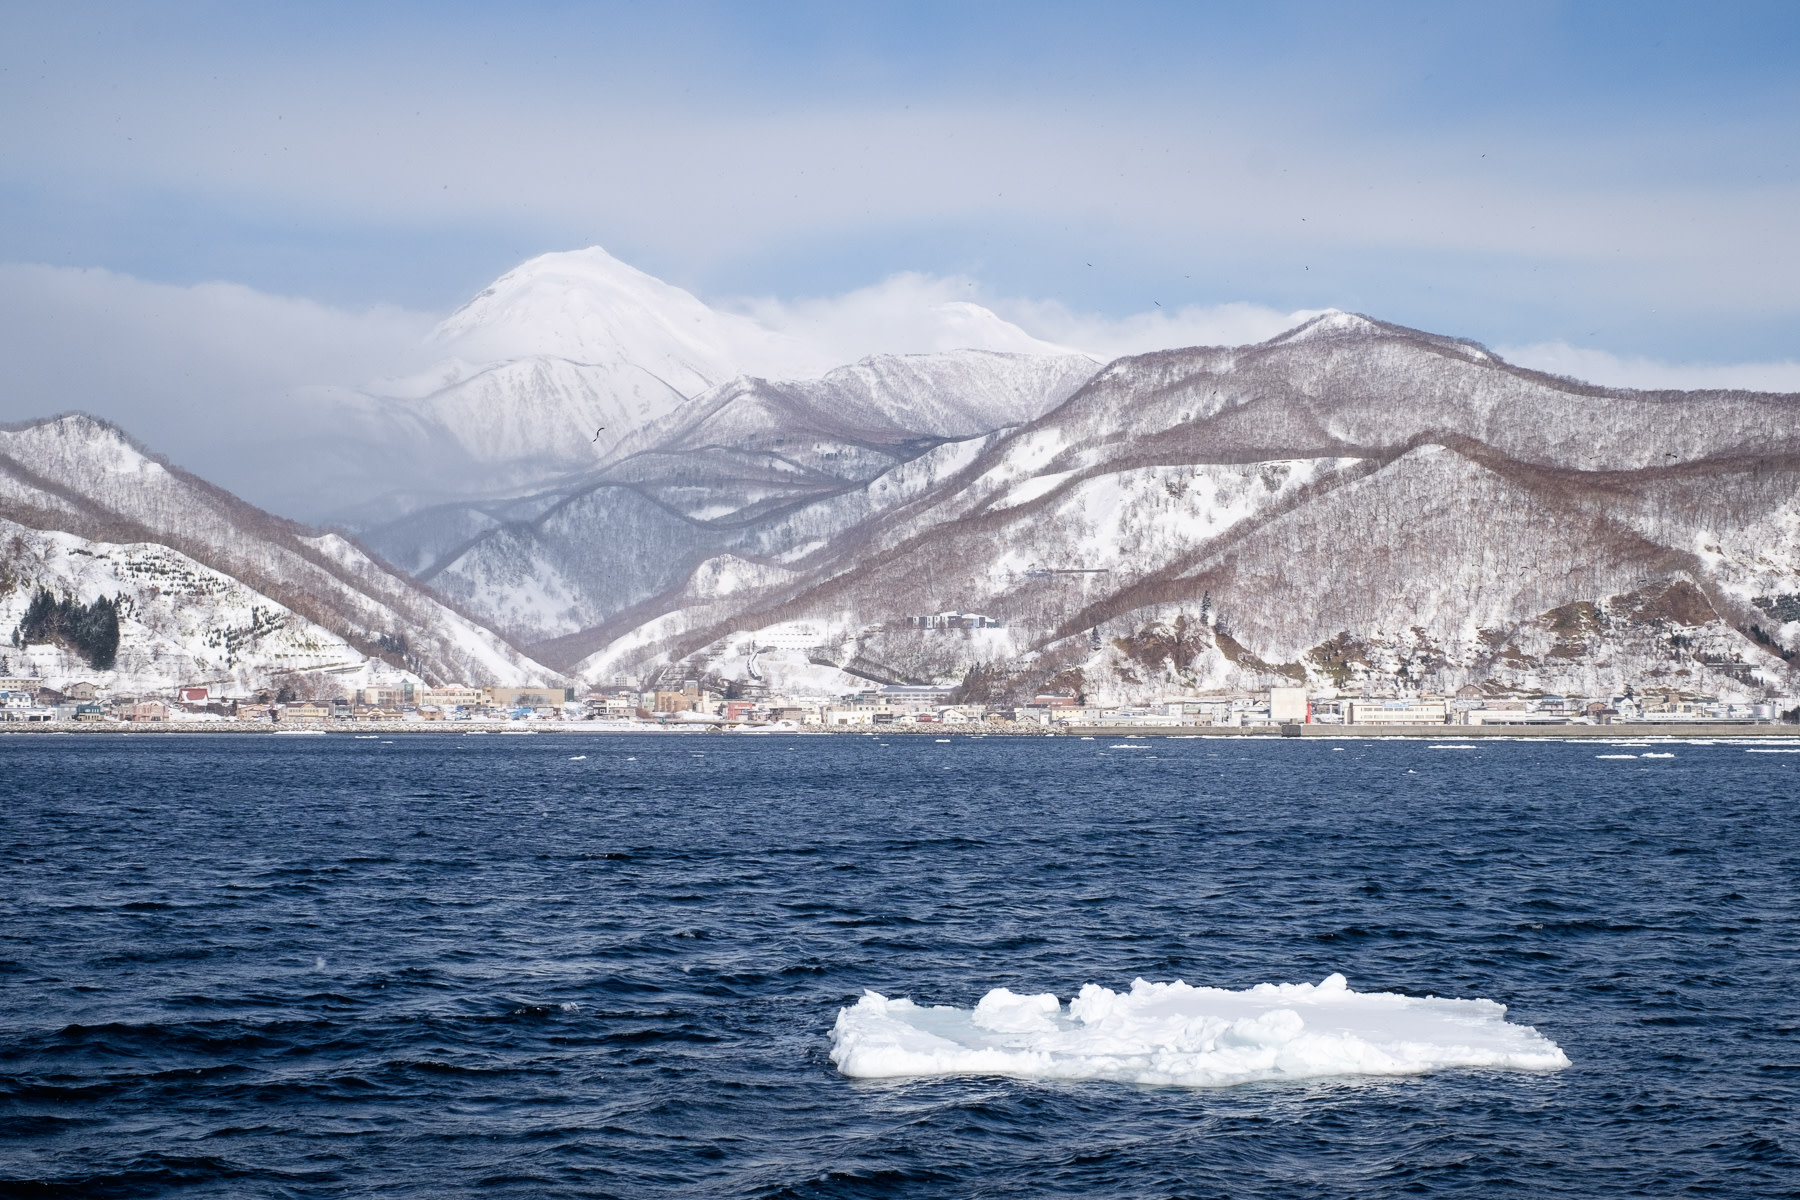 Mt Rausu, seen from the sea, rises above Rausu town. In the foreground a lone patch of drift ice floats past.